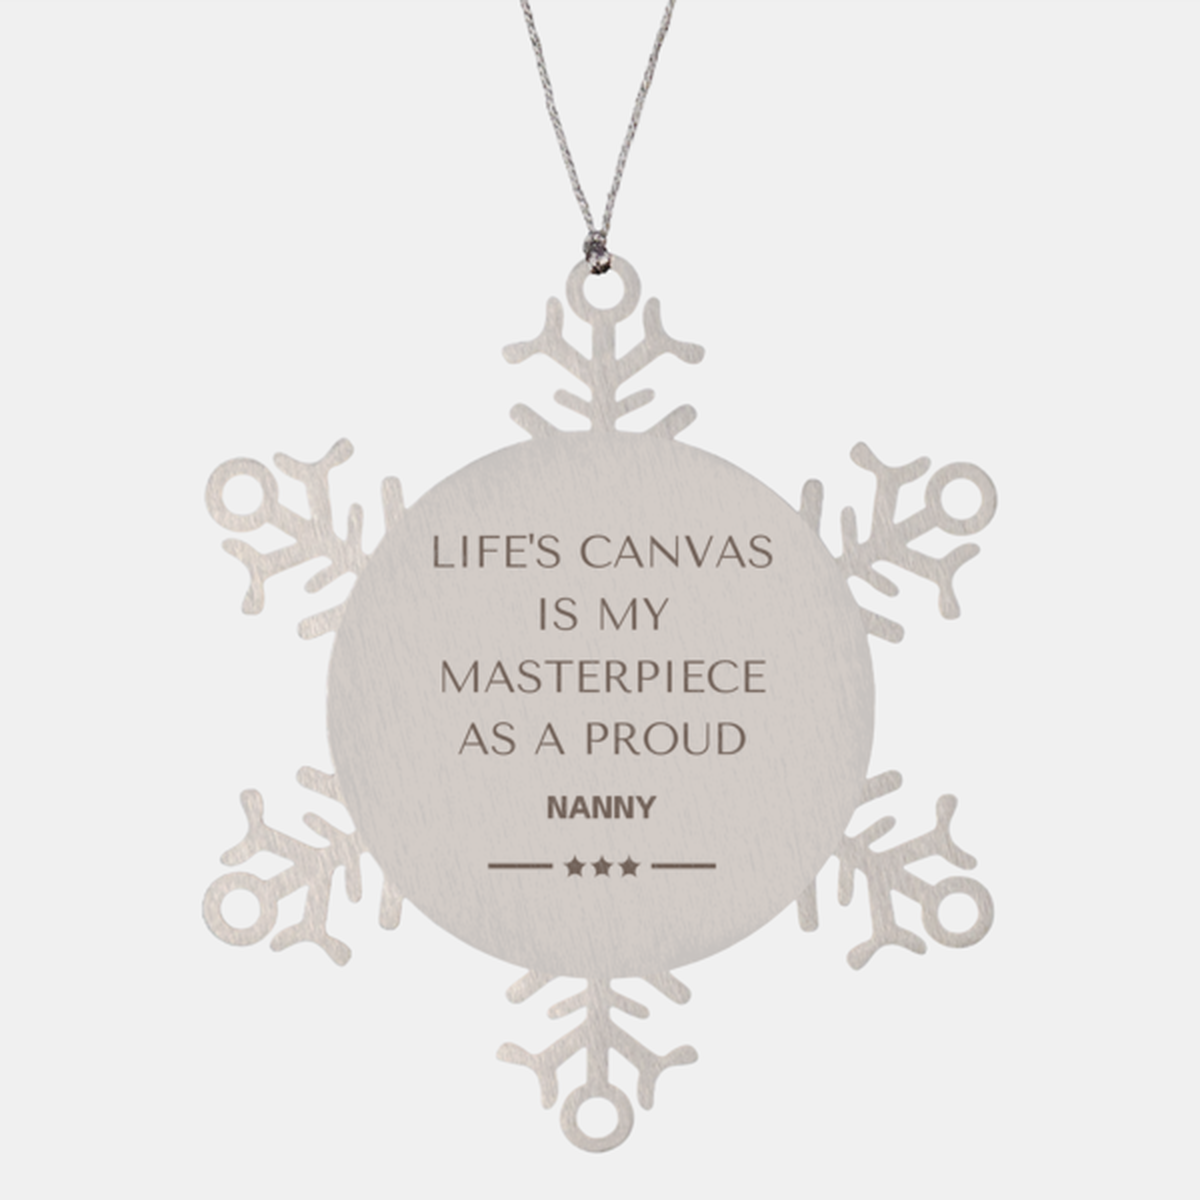 Proud Nanny Gifts, Life's canvas is my masterpiece, Epic Birthday Christmas Unique Snowflake Ornament For Nanny, Coworkers, Men, Women, Friends